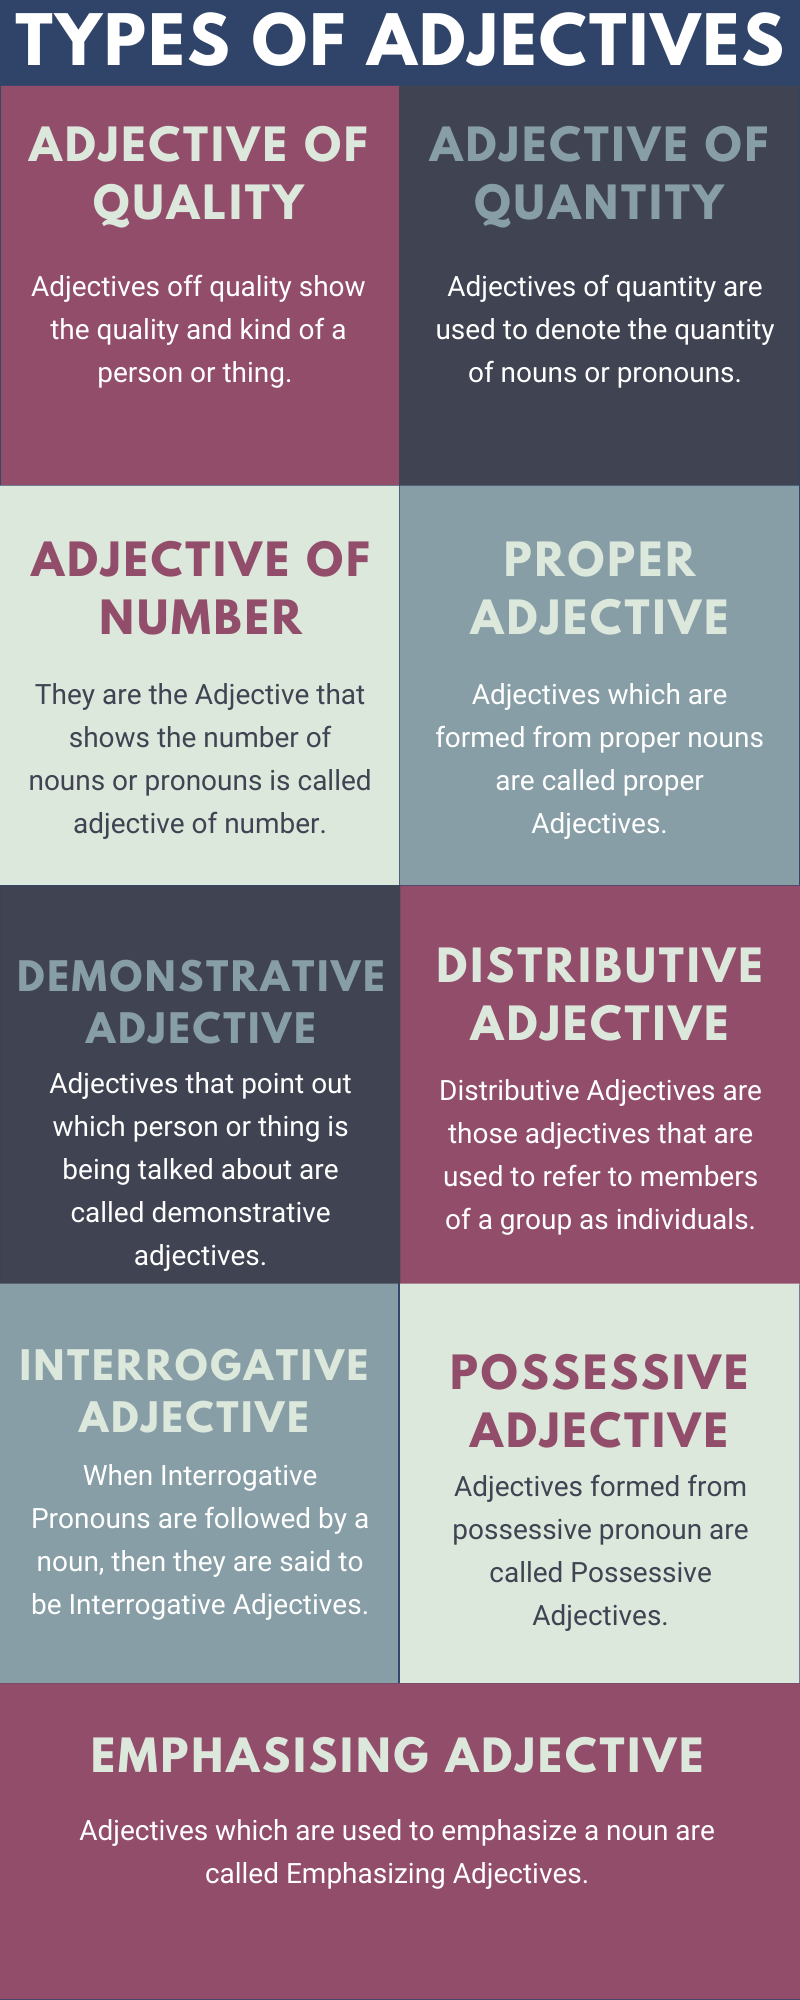 TYPES OF ADJECTIVES